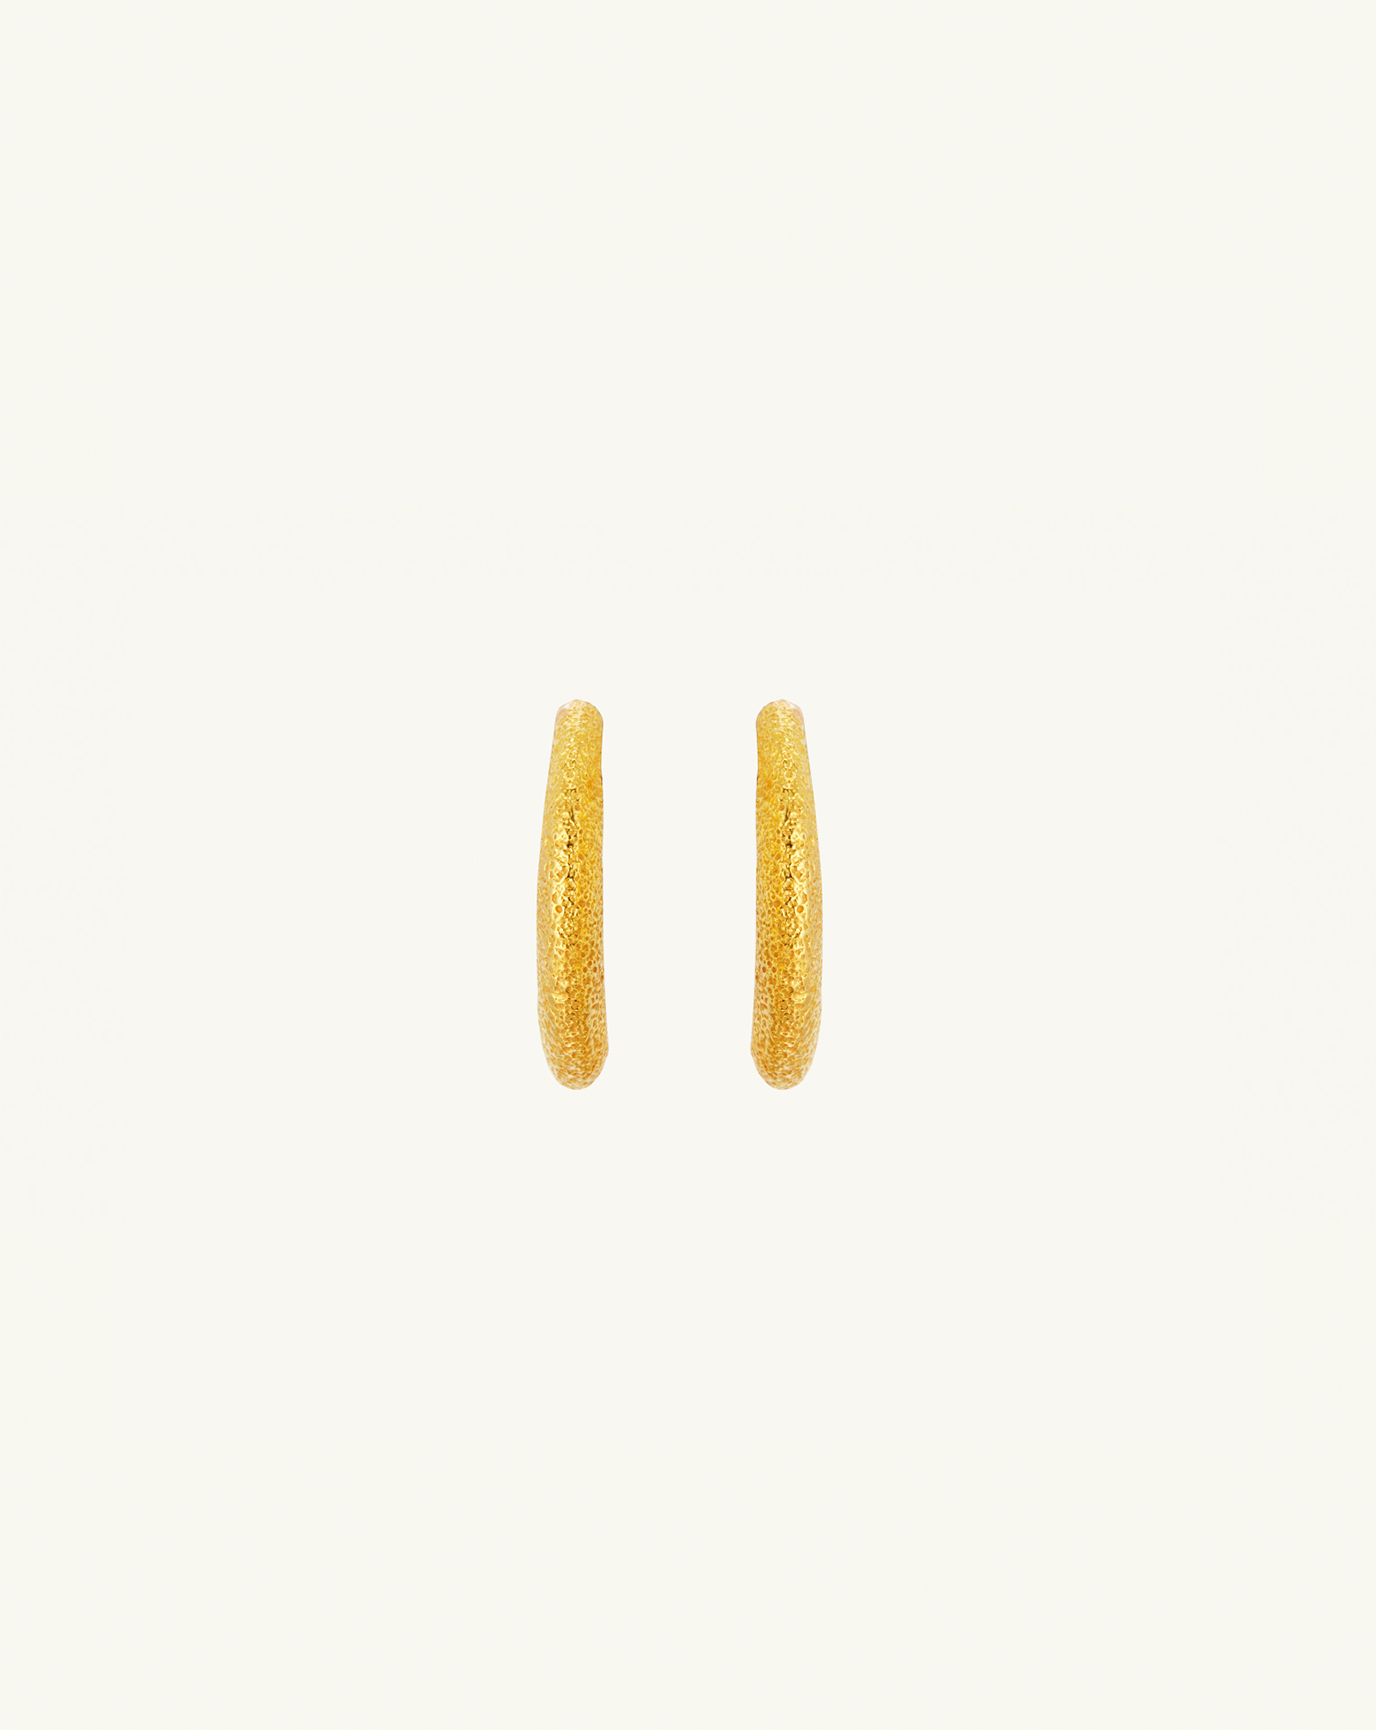 Straight-on product image of the medium sized asymmetric hoops with textured gold